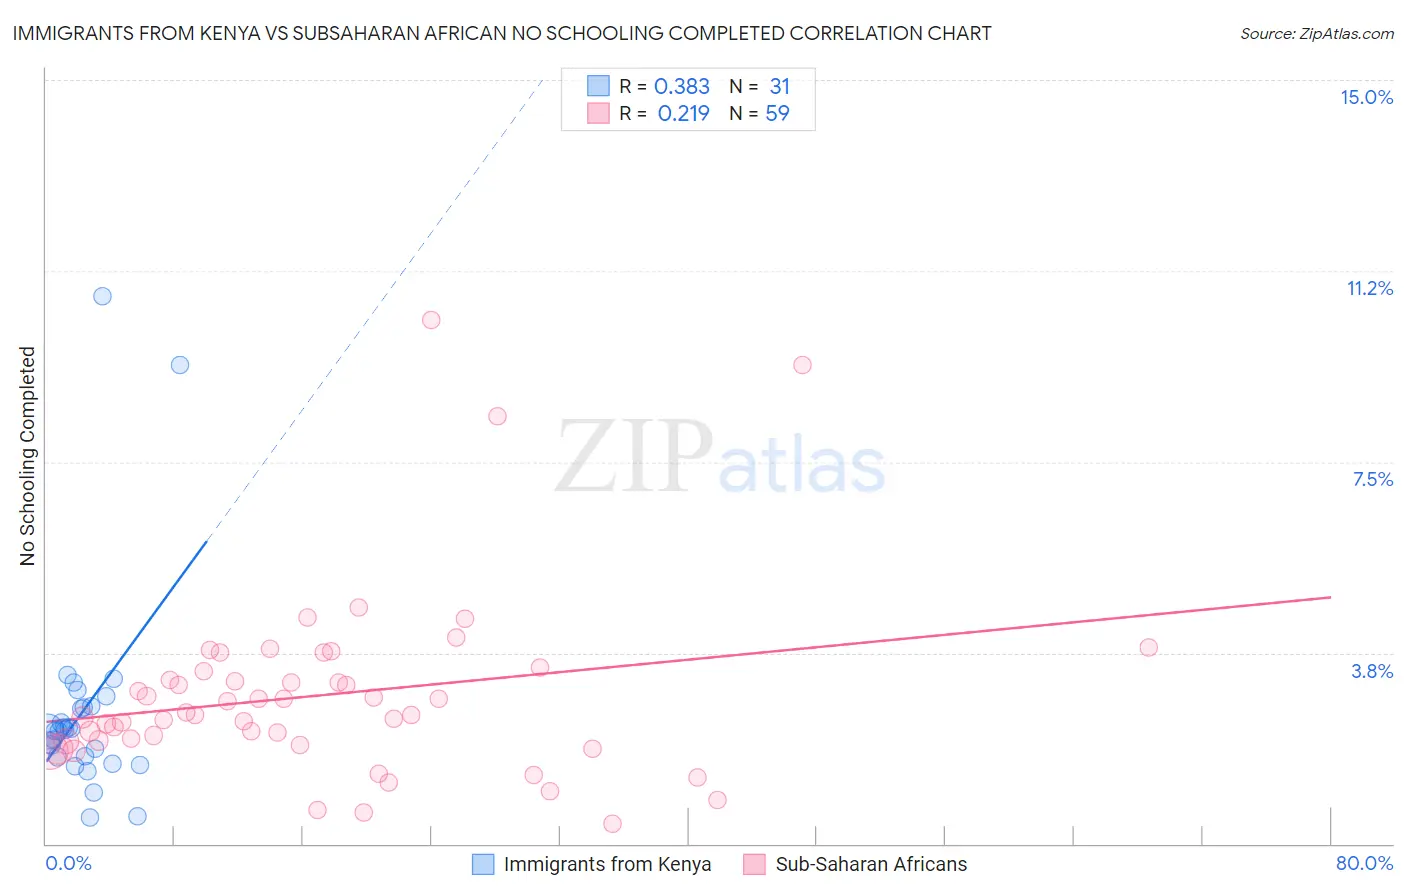 Immigrants from Kenya vs Subsaharan African No Schooling Completed